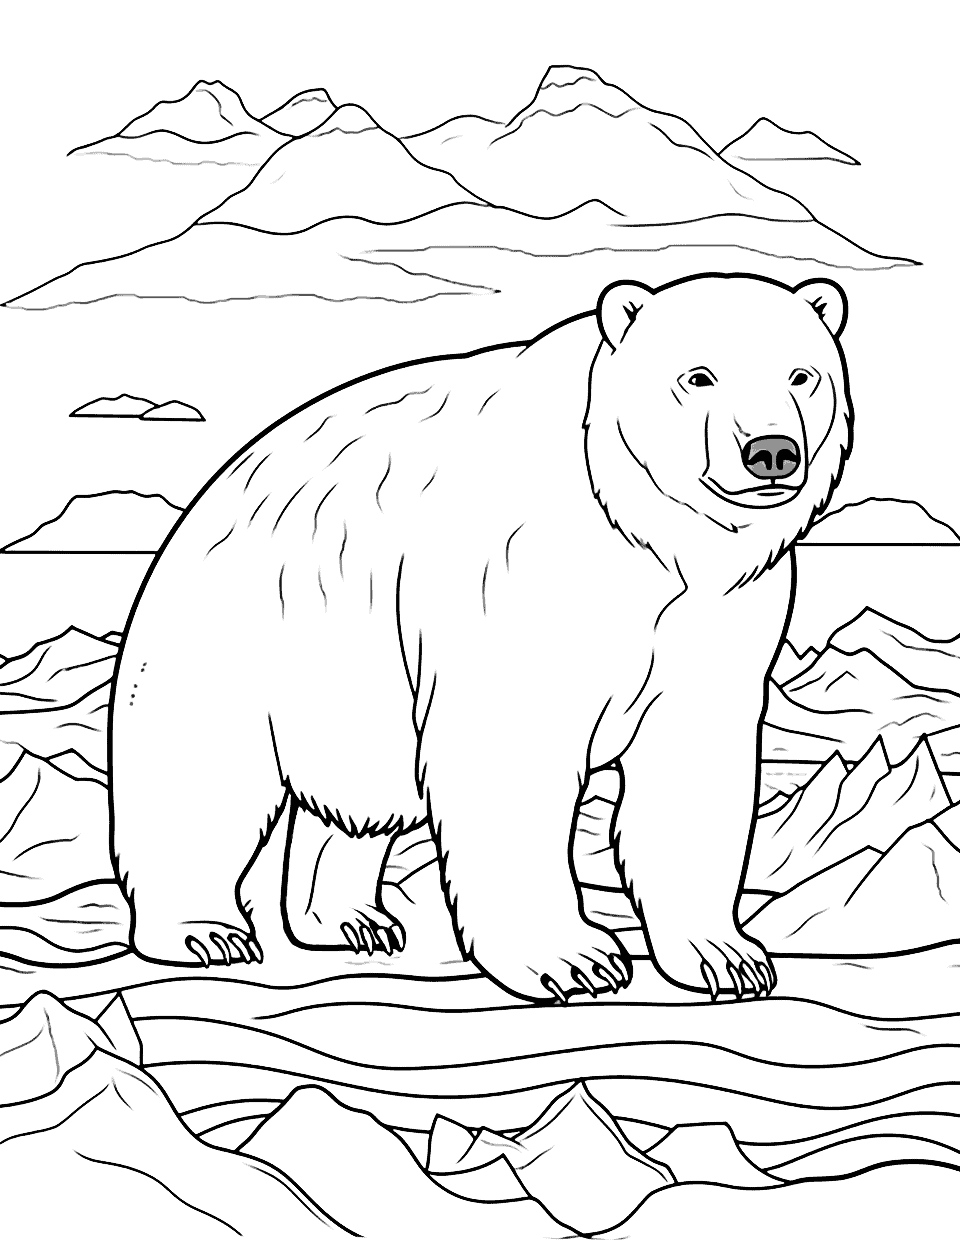 Polar Bear's Iceberg Winter Coloring Page - A detailed image of a polar bear lounging on an iceberg, surrounded by snowy mountains.